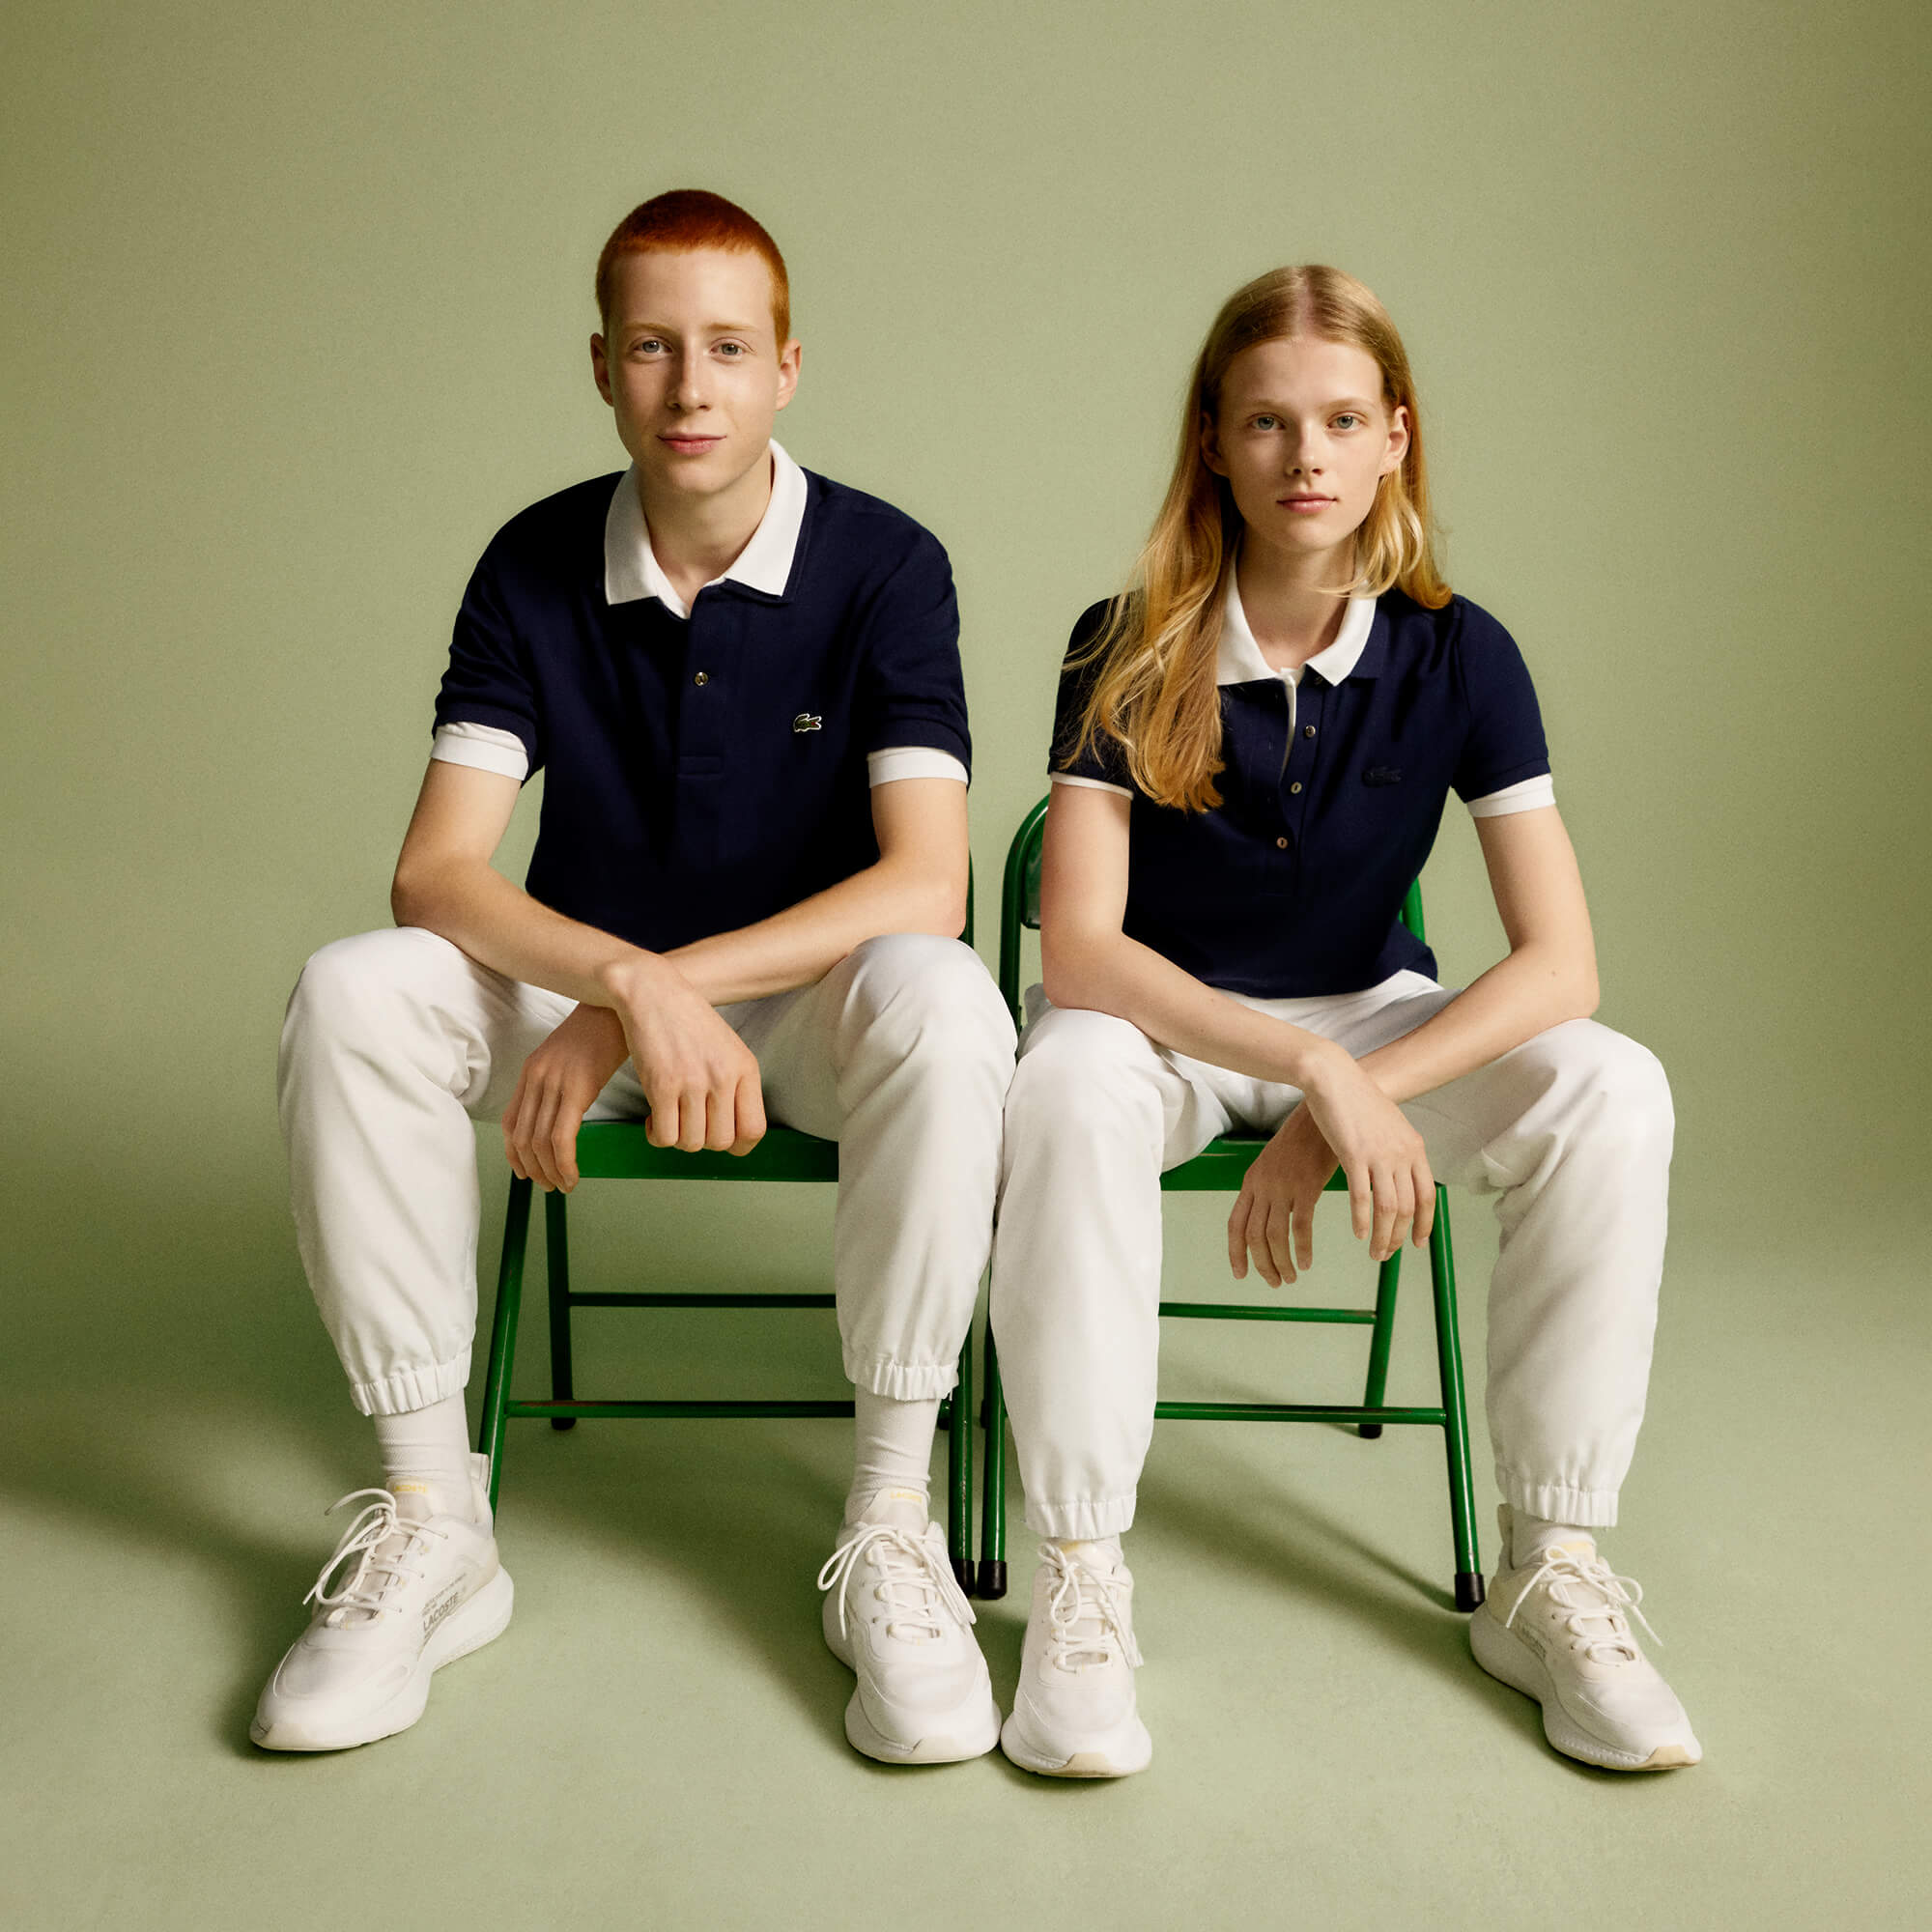 Lacoste Slim Fit Polo Shirt on men and women sitting next to each other